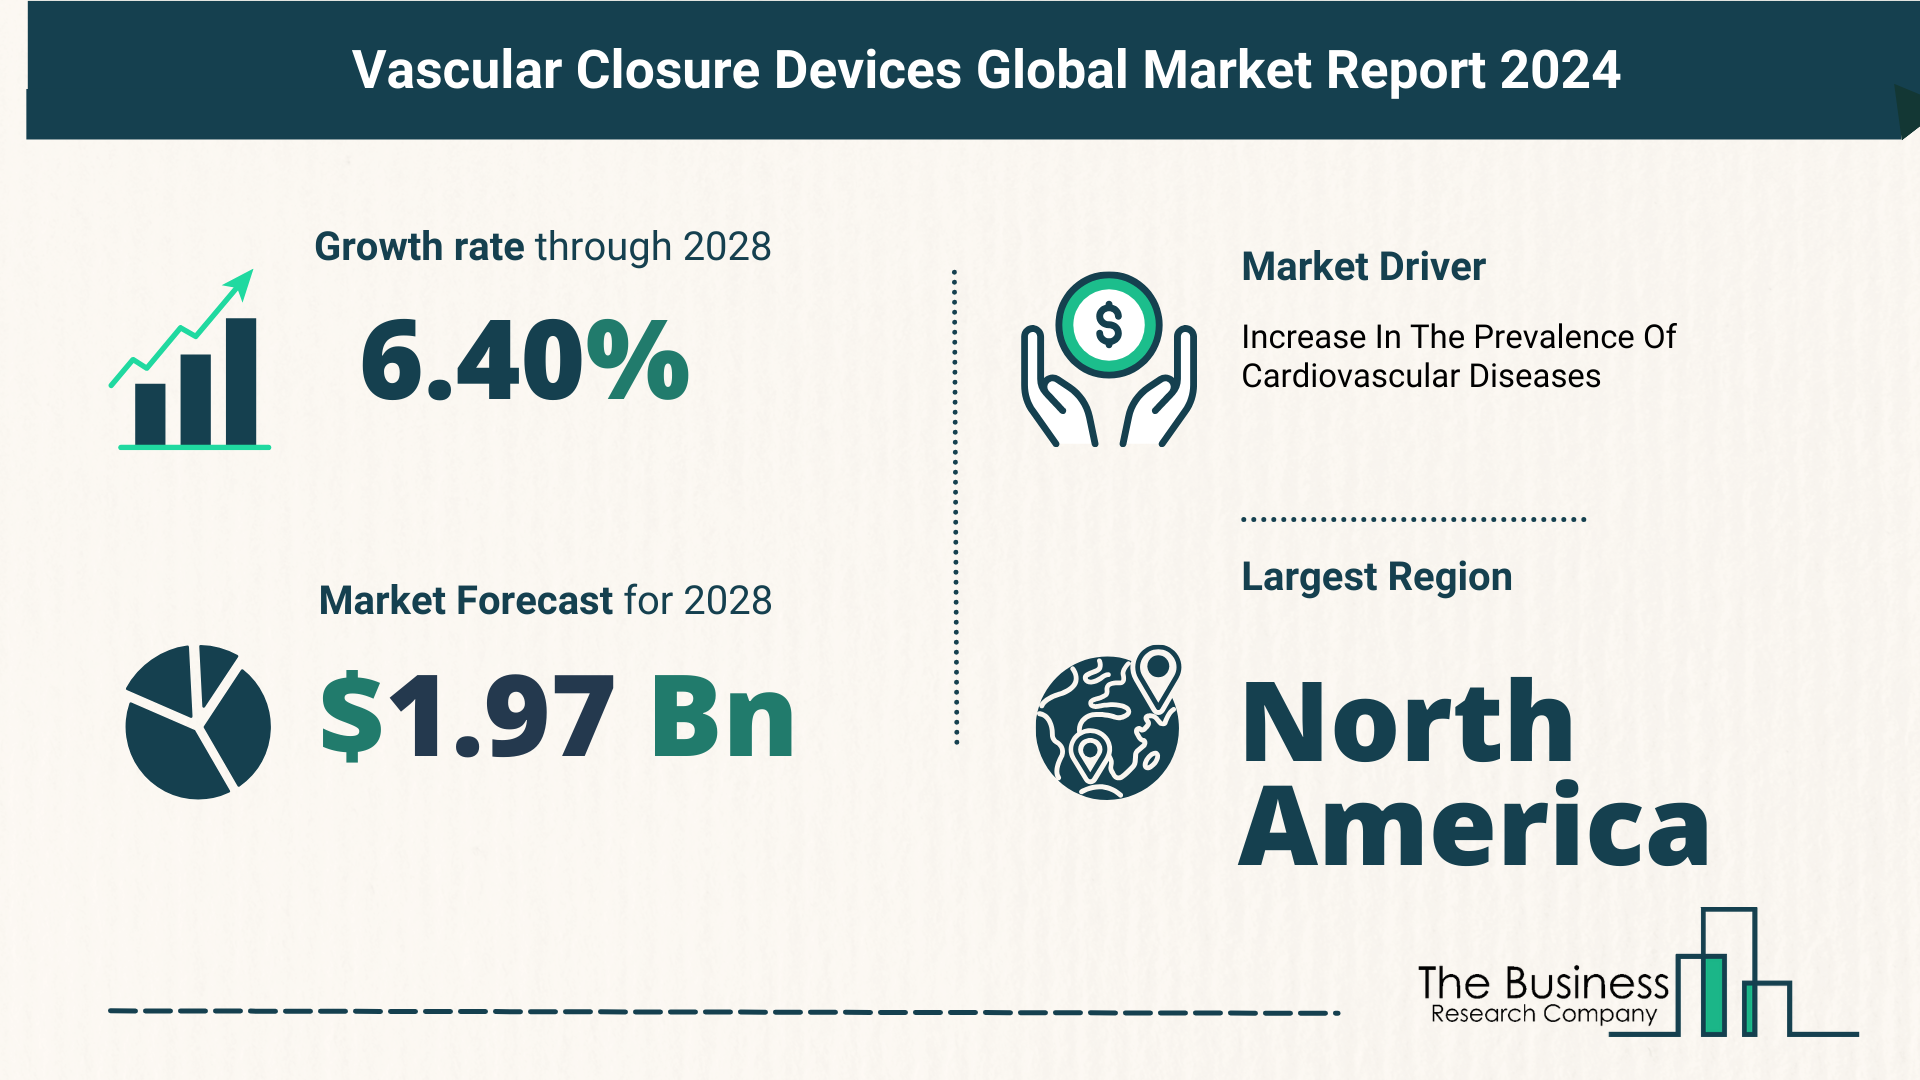 Key Takeaways From The Global Vascular Closure Devices Market Forecast 2024